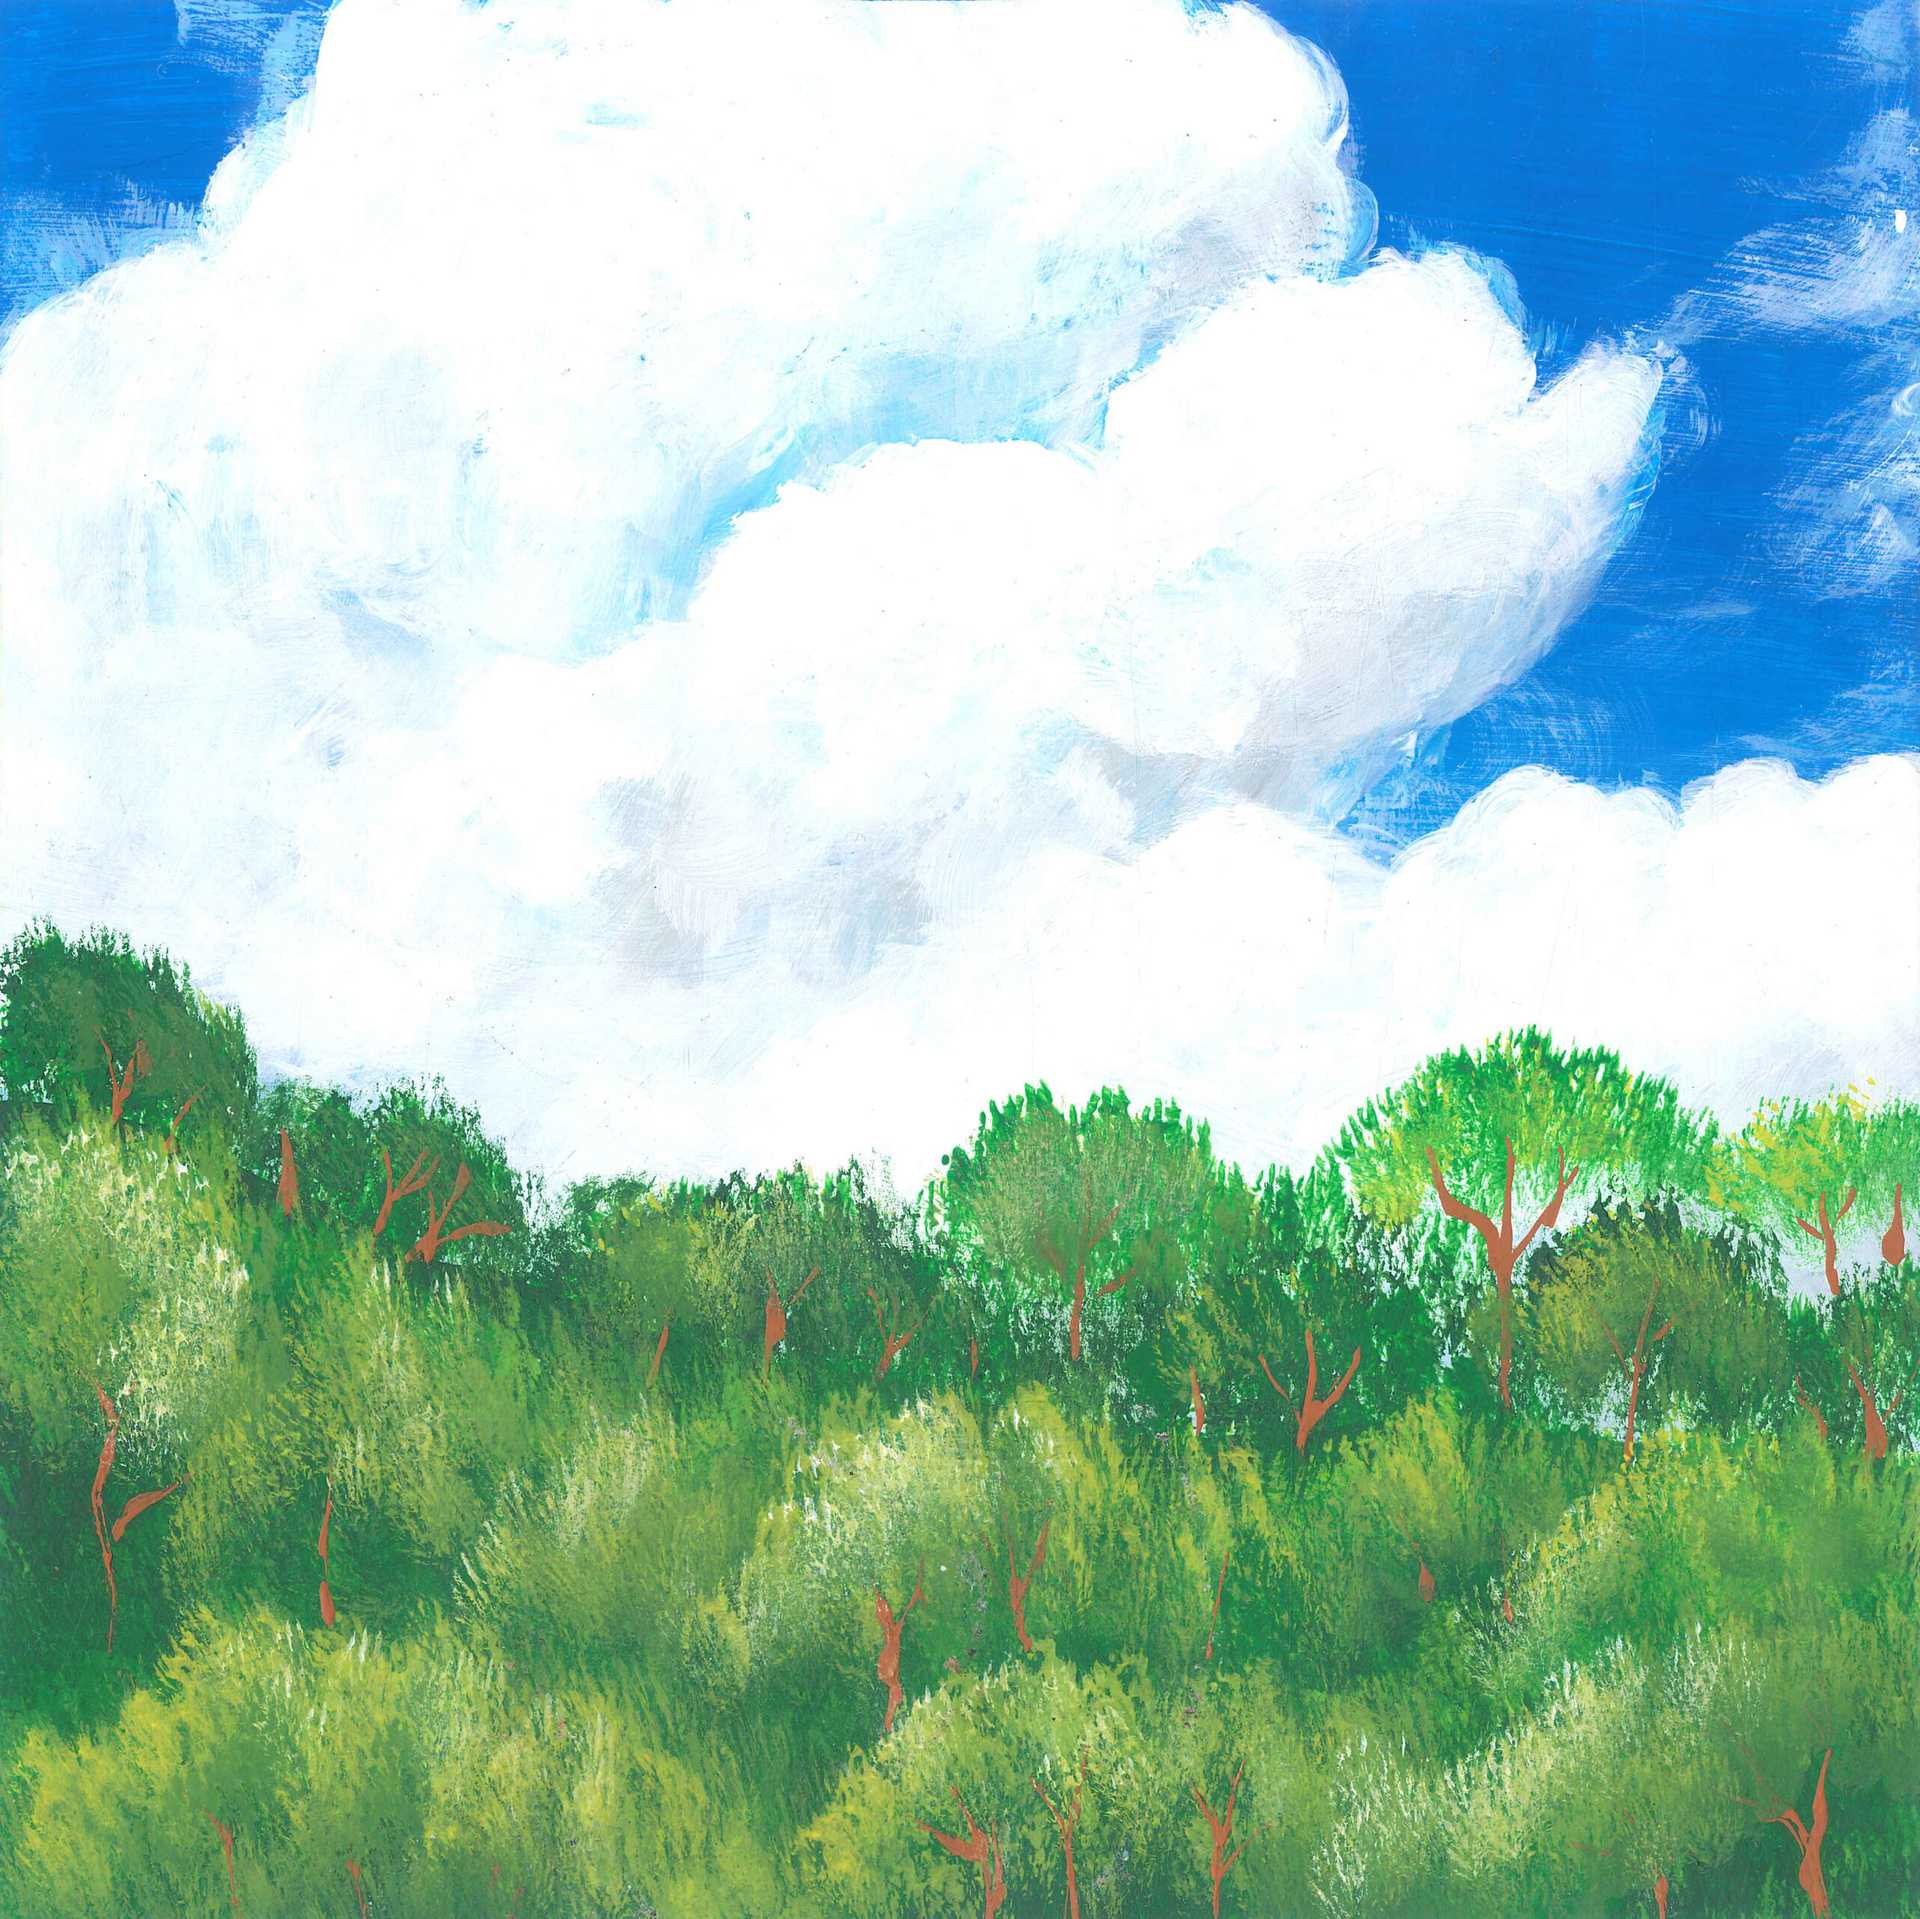 Solitude in the Rainforest - nature landscape painting - earth.fm